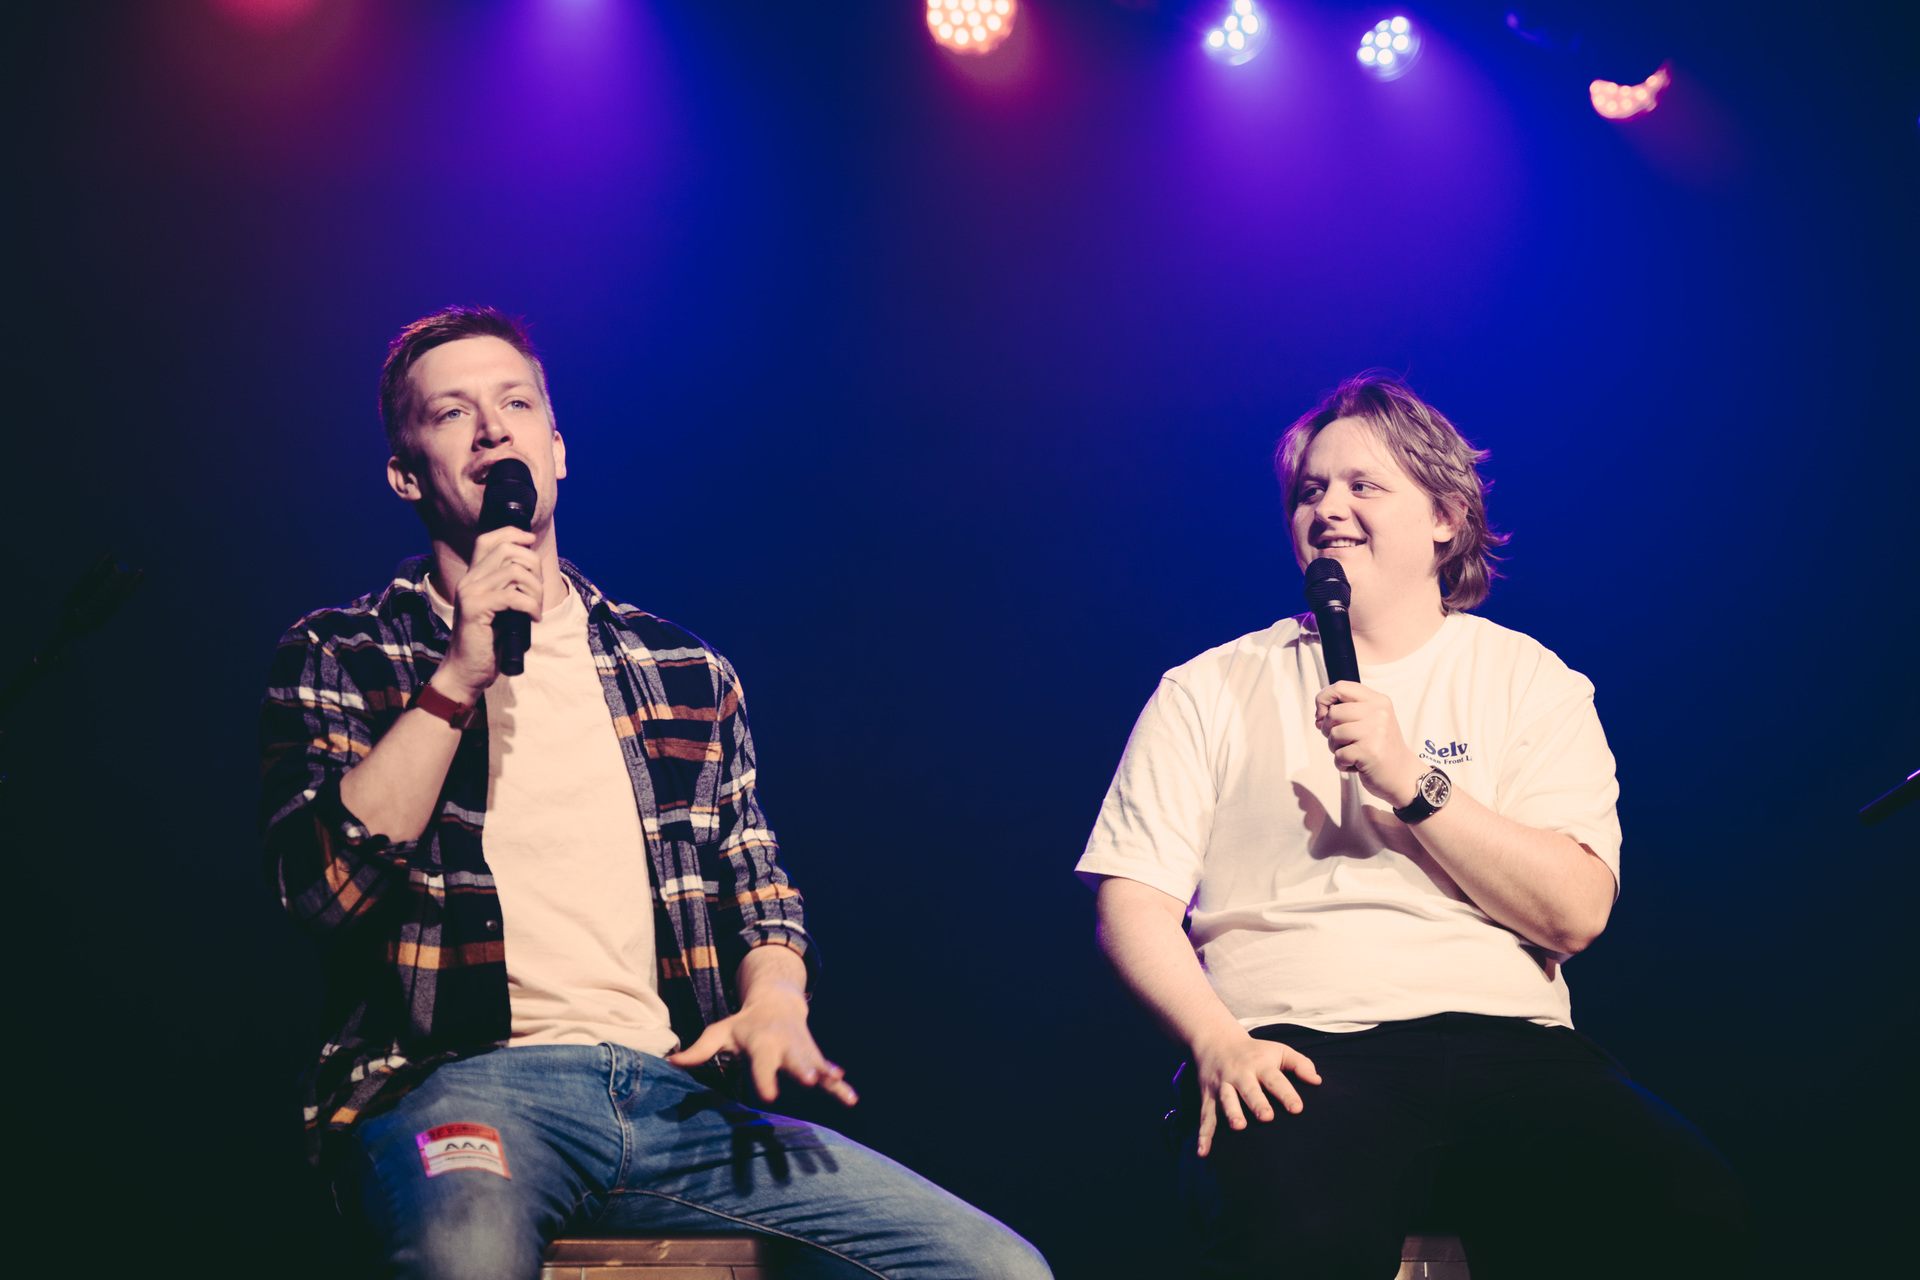 Daniel Sloss (left) asked Capaldi (right) some questions before the music began. 